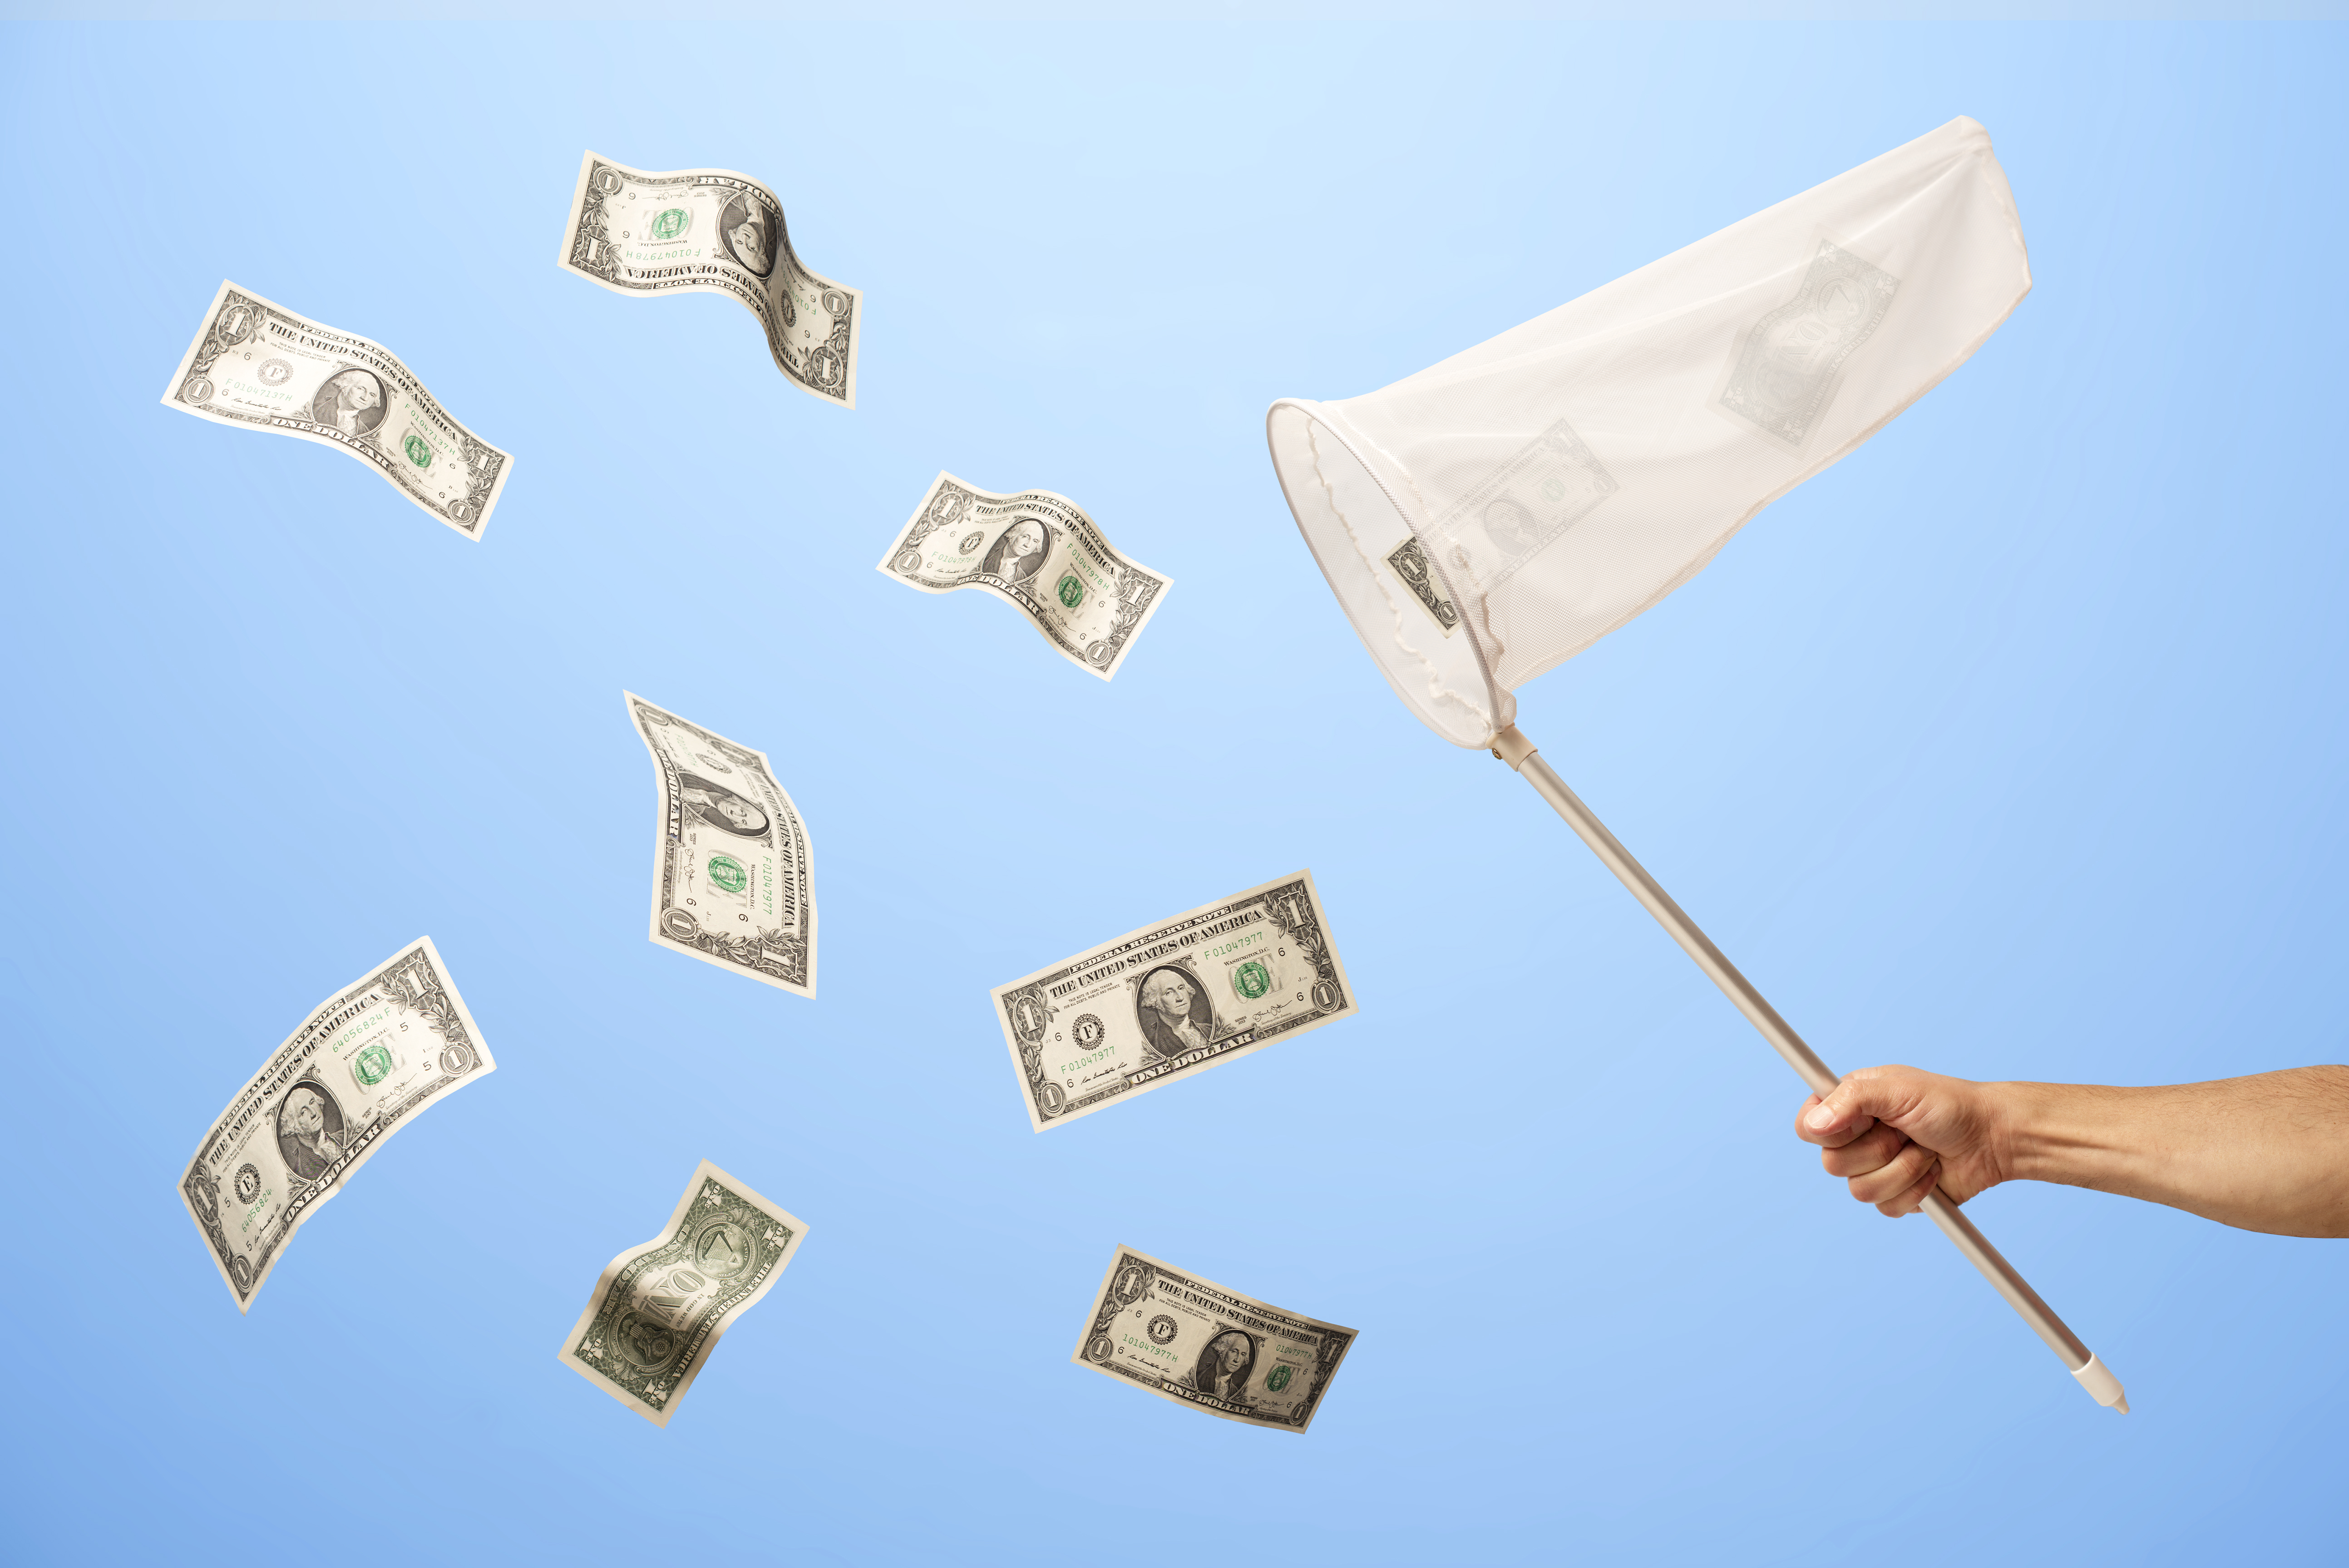 Catching dollar bills with a net; fundraising in turbulent market